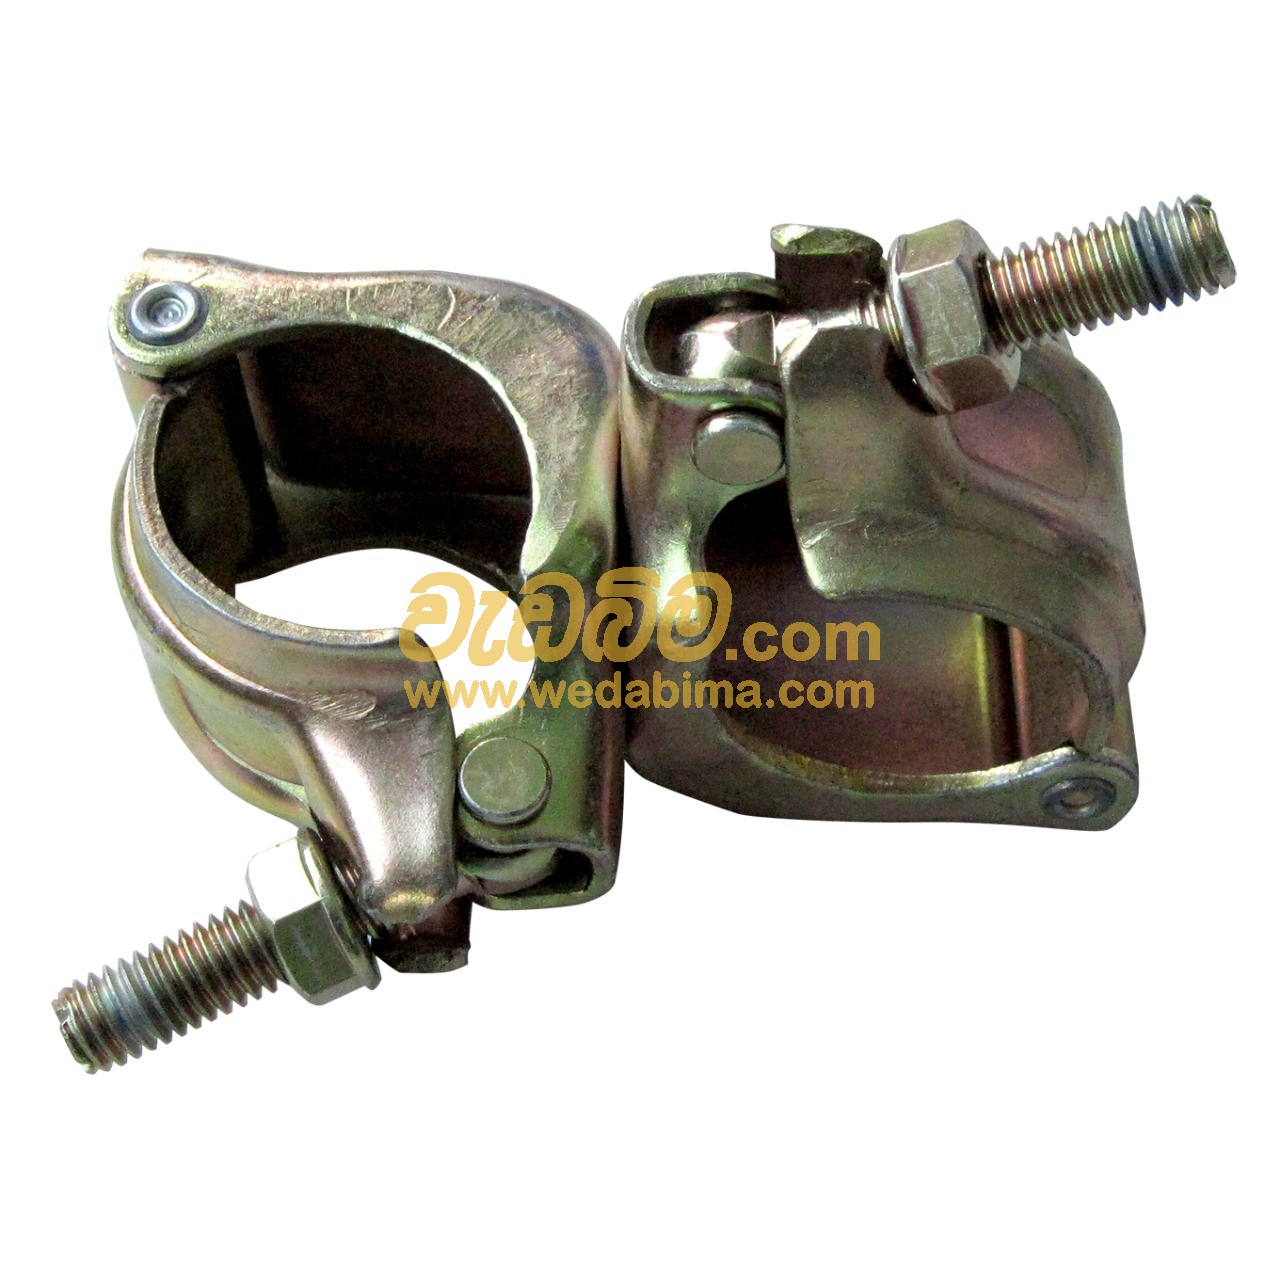 Scaffolding Clamps for Sale